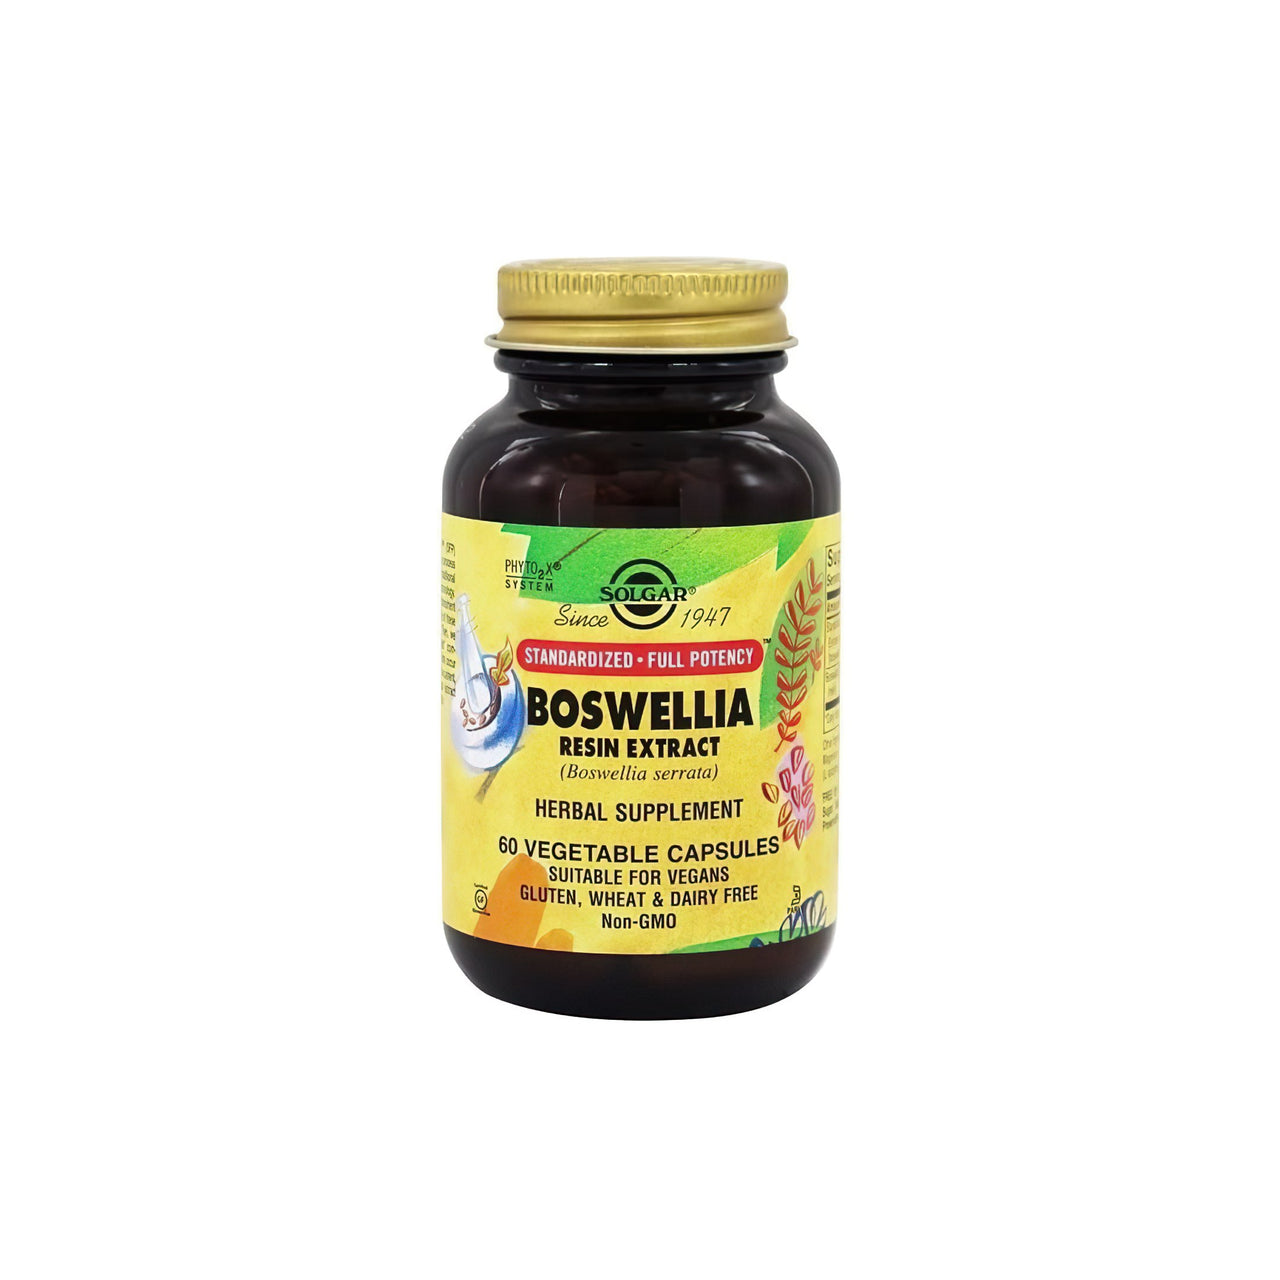 SFP Boswellia Resin Extract 60 Vegetable Capsules - front